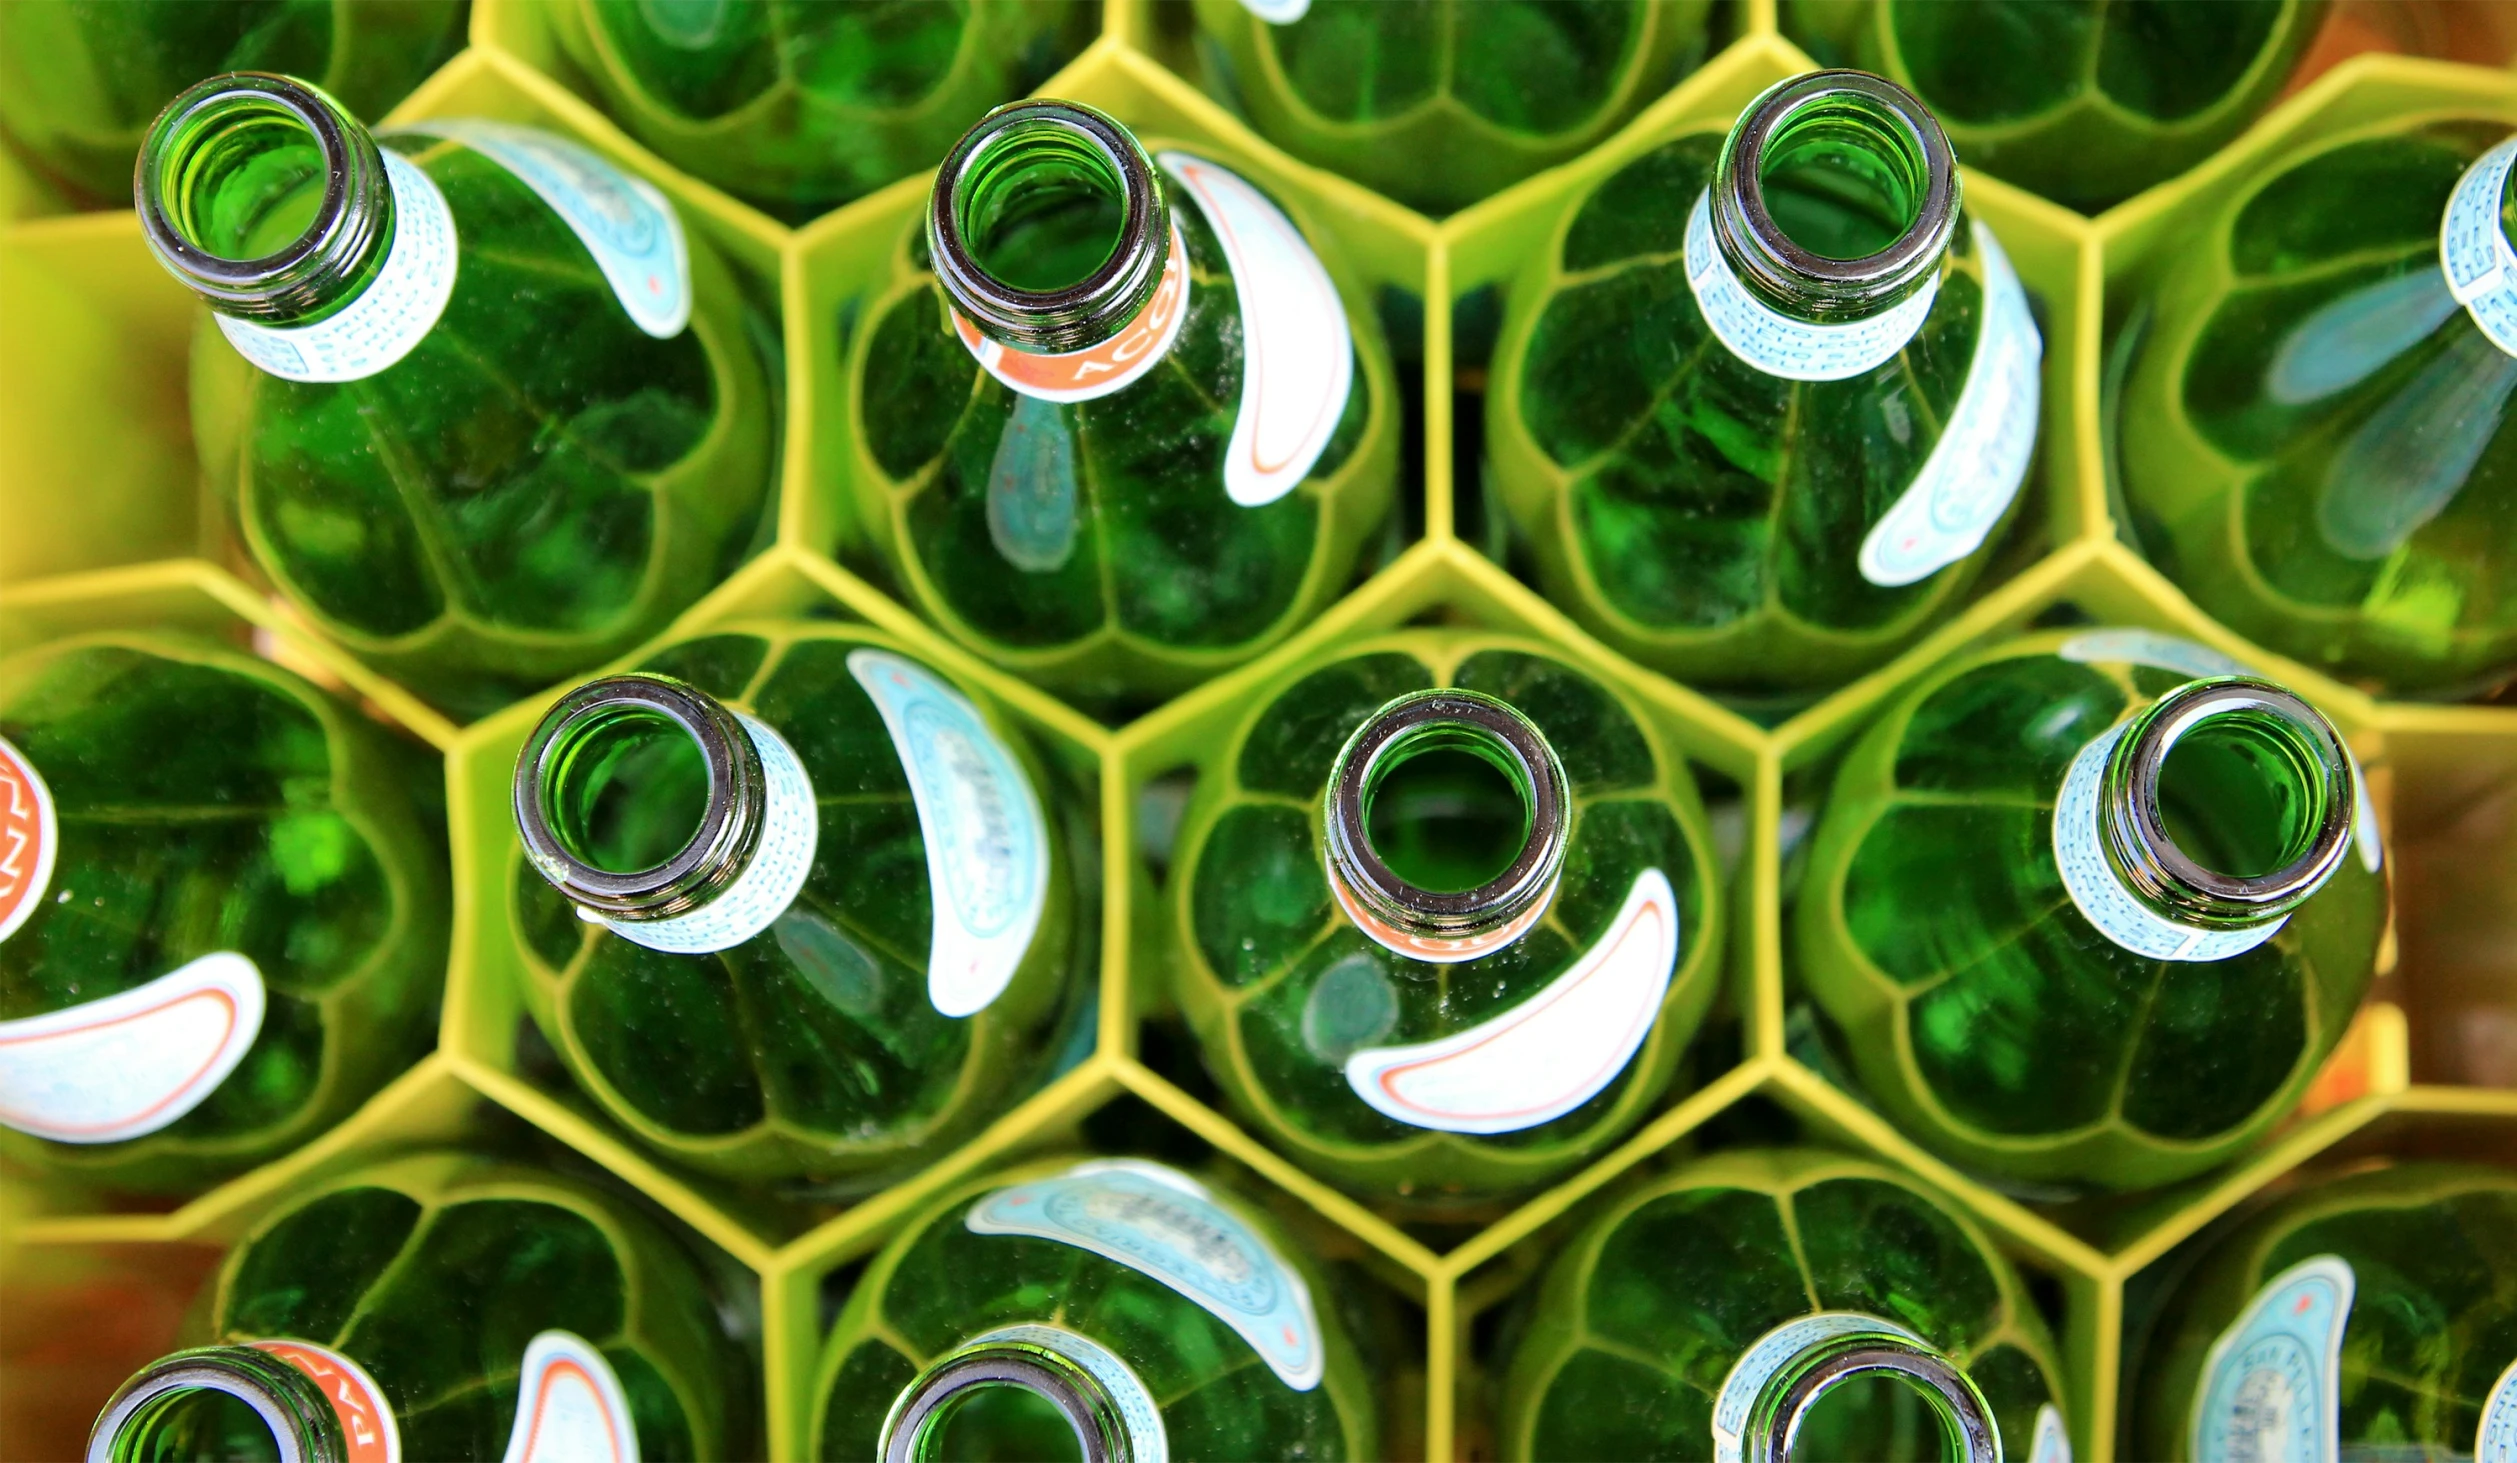 many green glass bottles are stacked and lined in rows